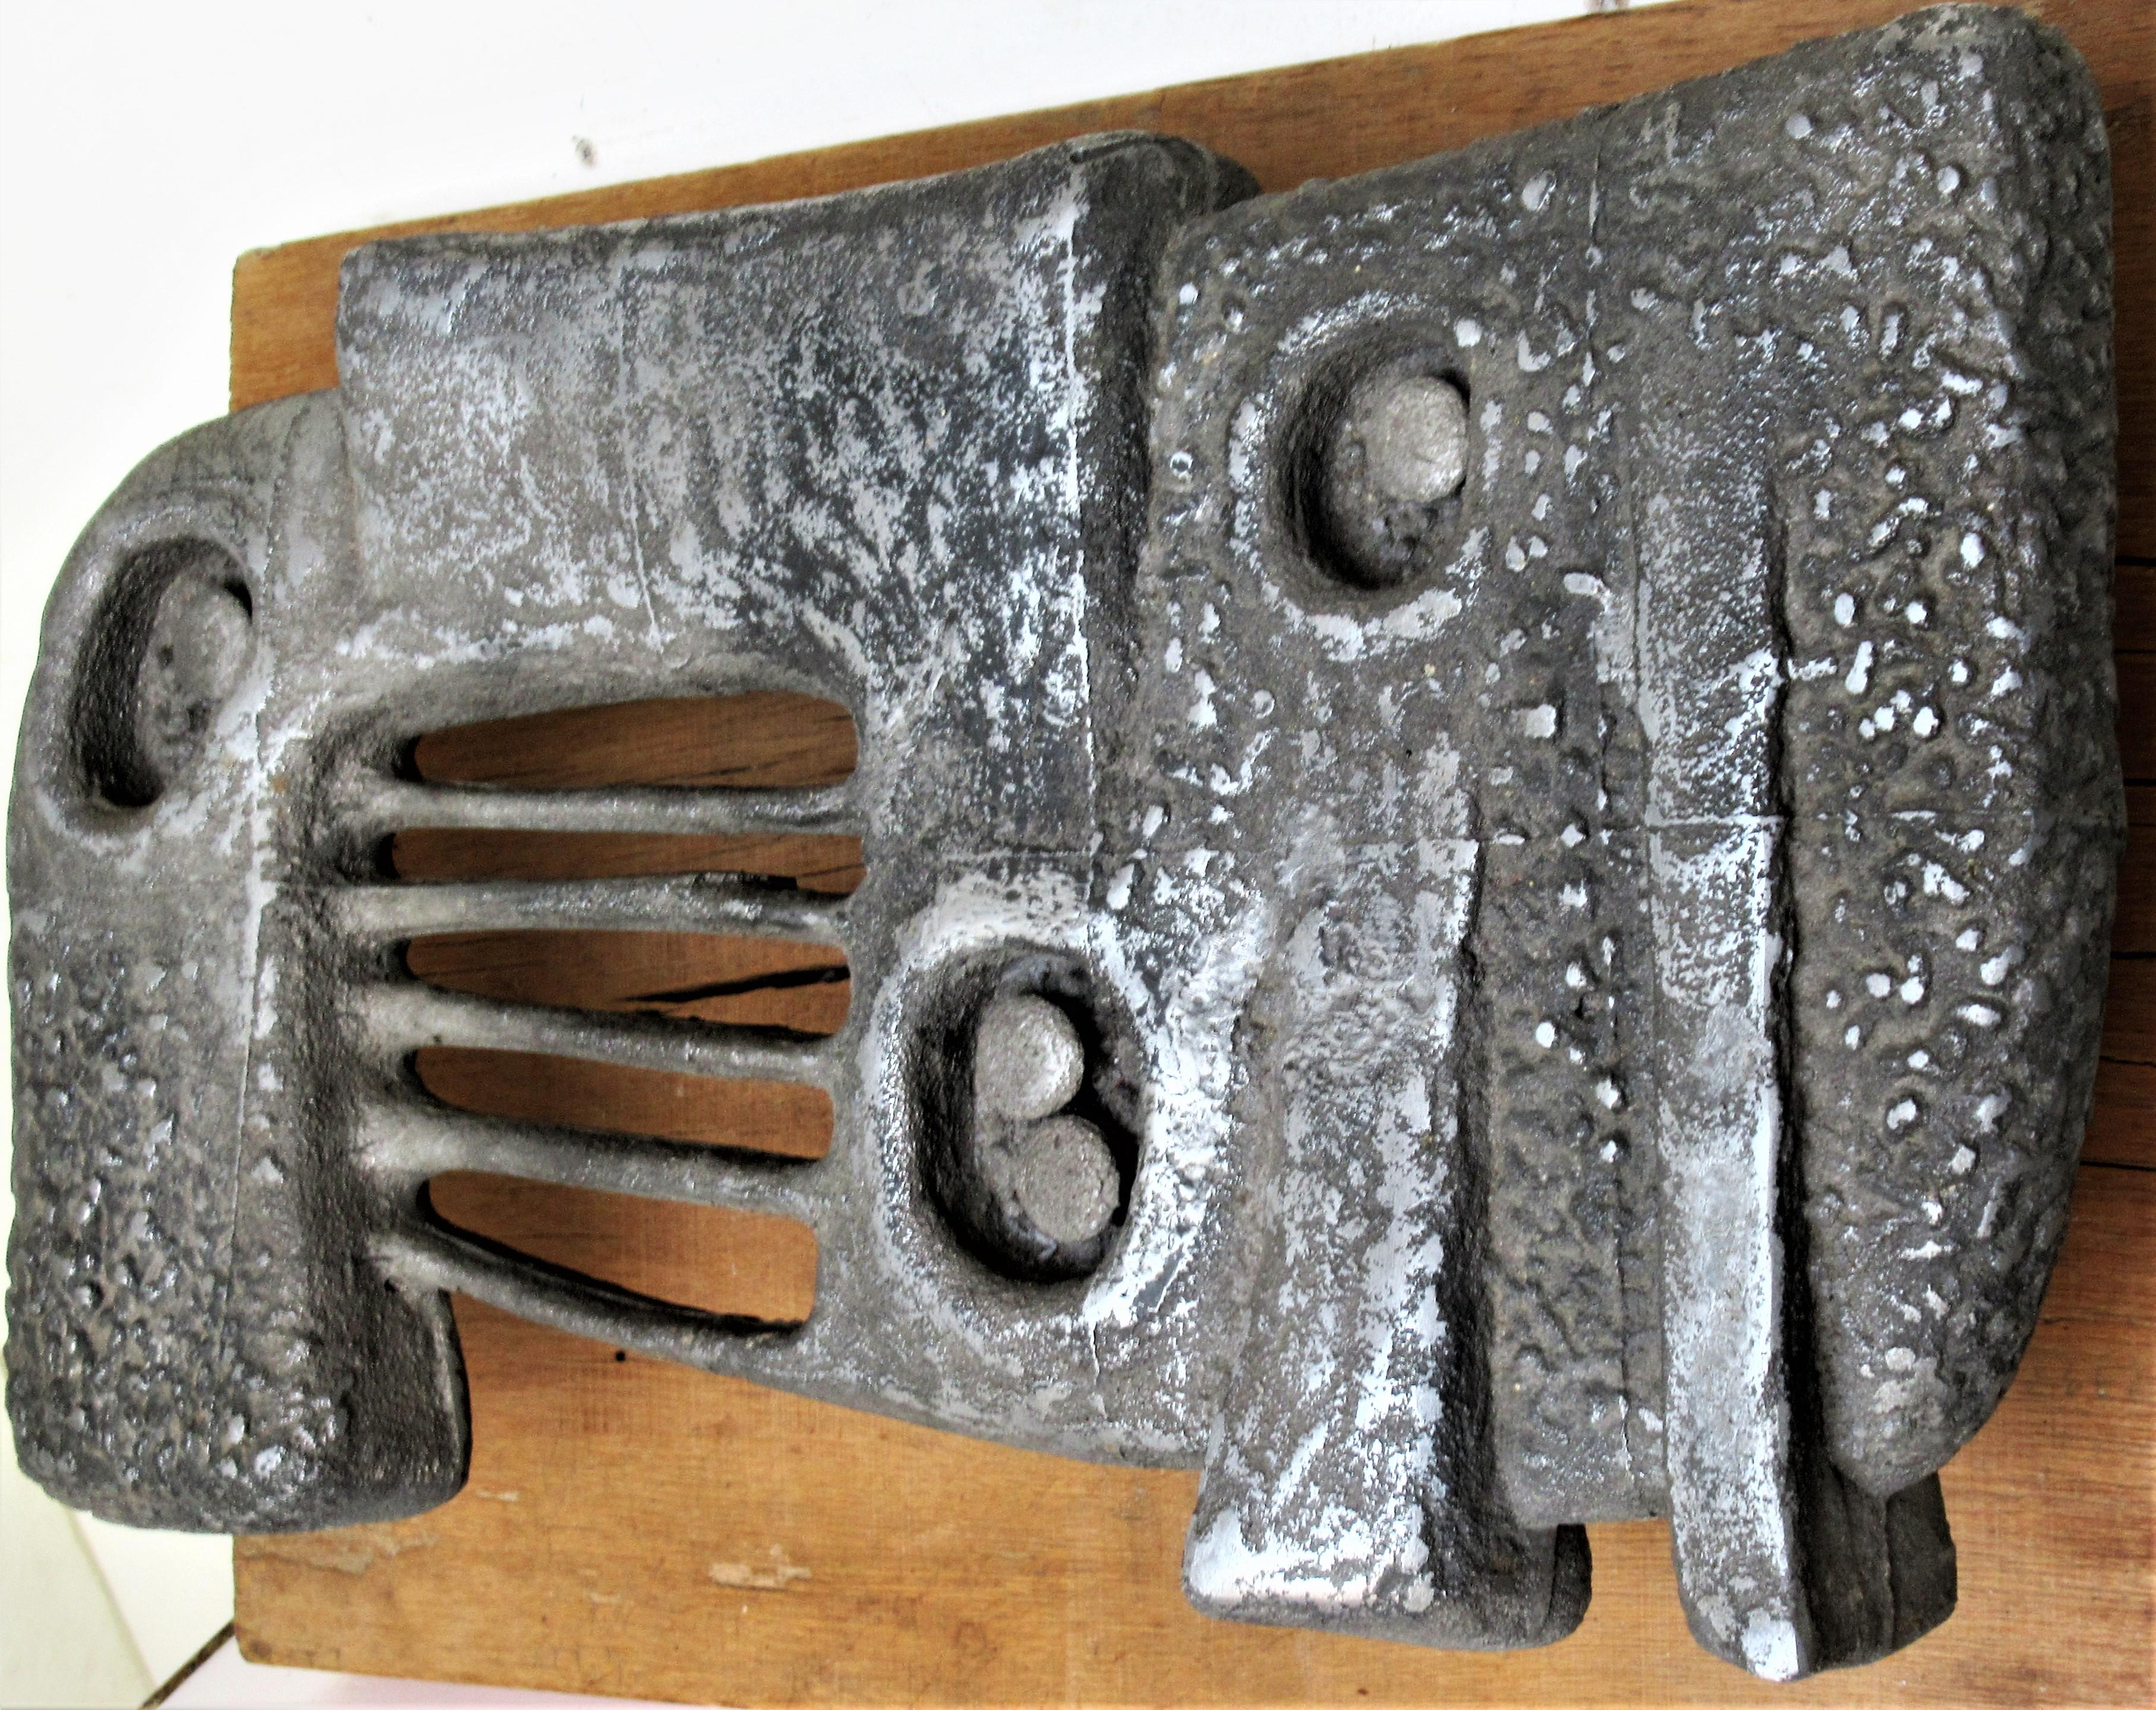 Large abstract metal wall sculpture by acclaimed American artist sculptor William F. Sellers (1929-2019) Beautifully patinated textured surface. Signed / dated on top of reverse side, WFS '61. Bolt mounted to the original thick wood board for